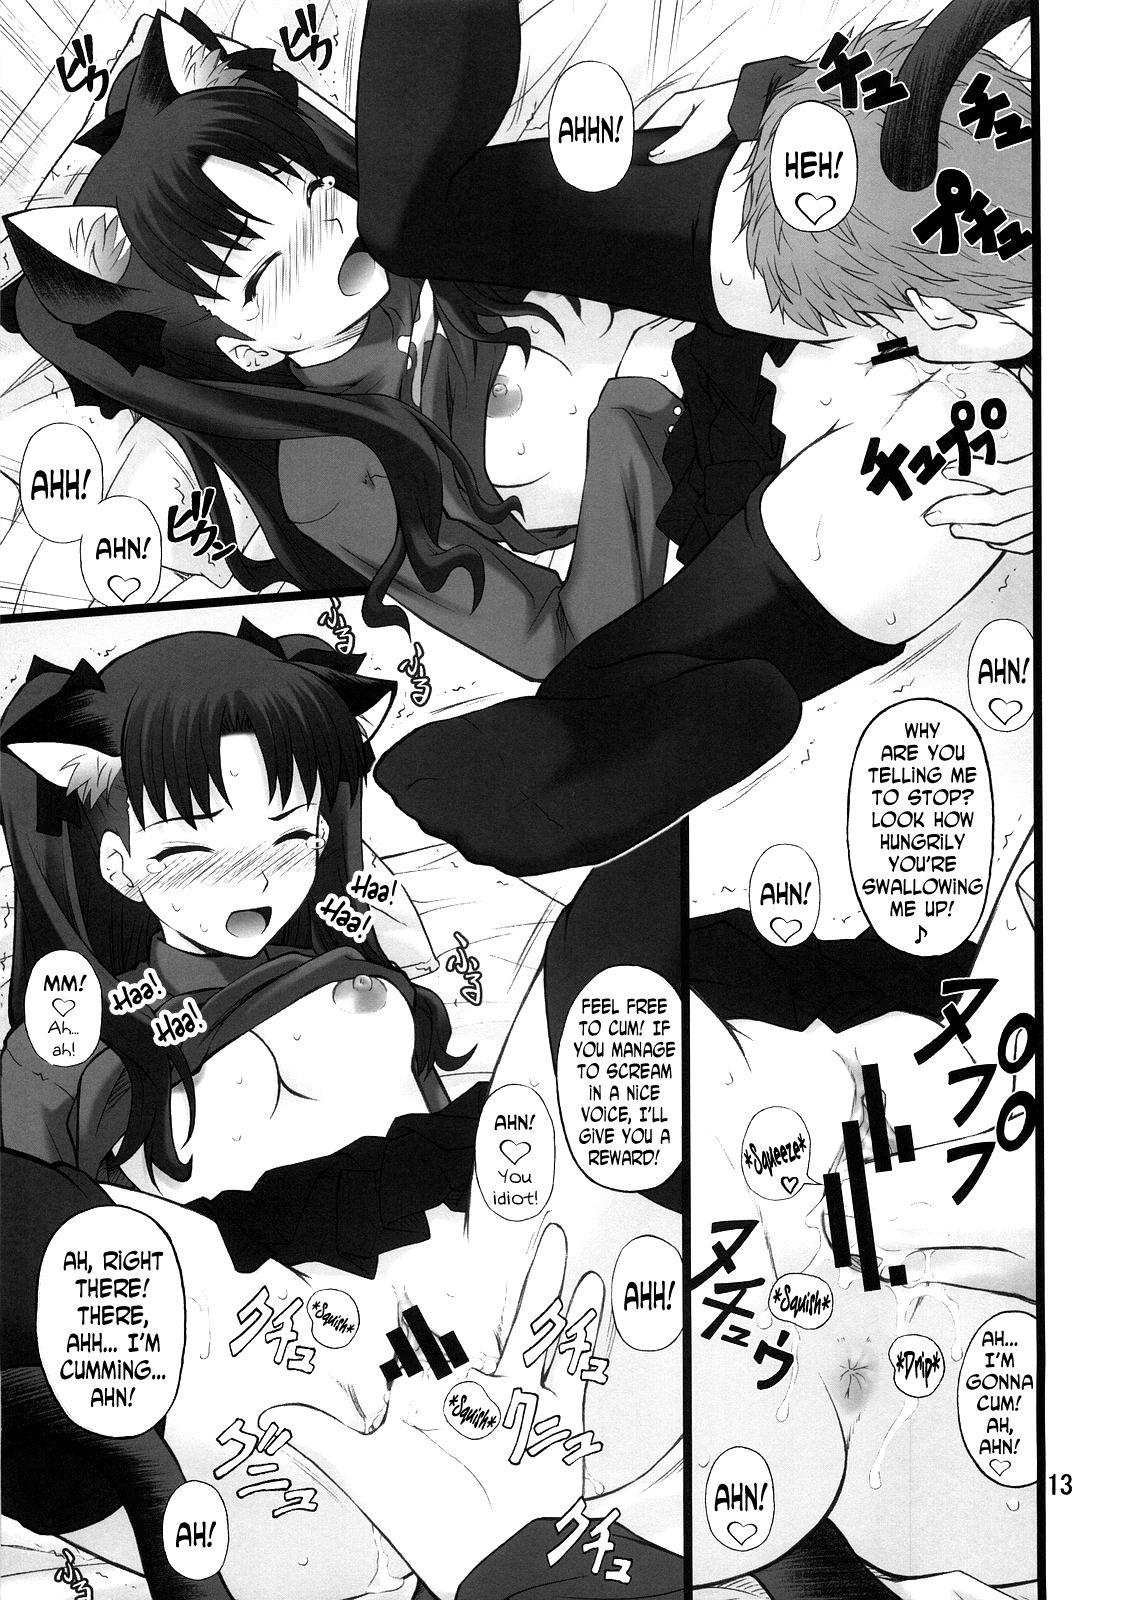 Bedroom Grem-Rin 1 - Fate stay night Free Blowjob - Page 12